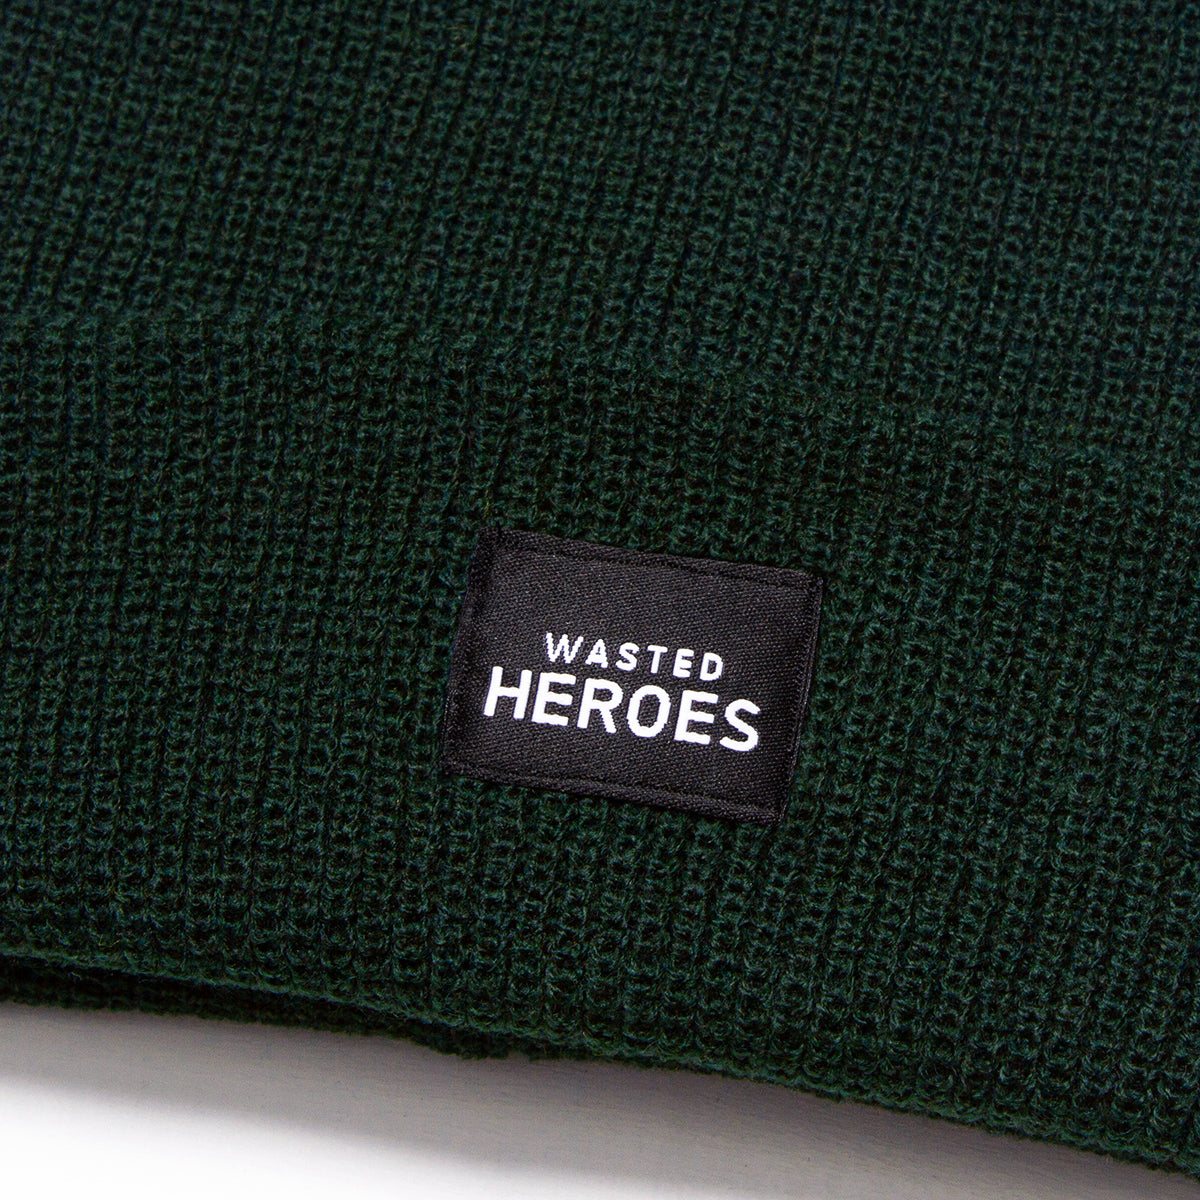 Wasted Heroes - Beanie - Bottle Green - Wasted Heroes